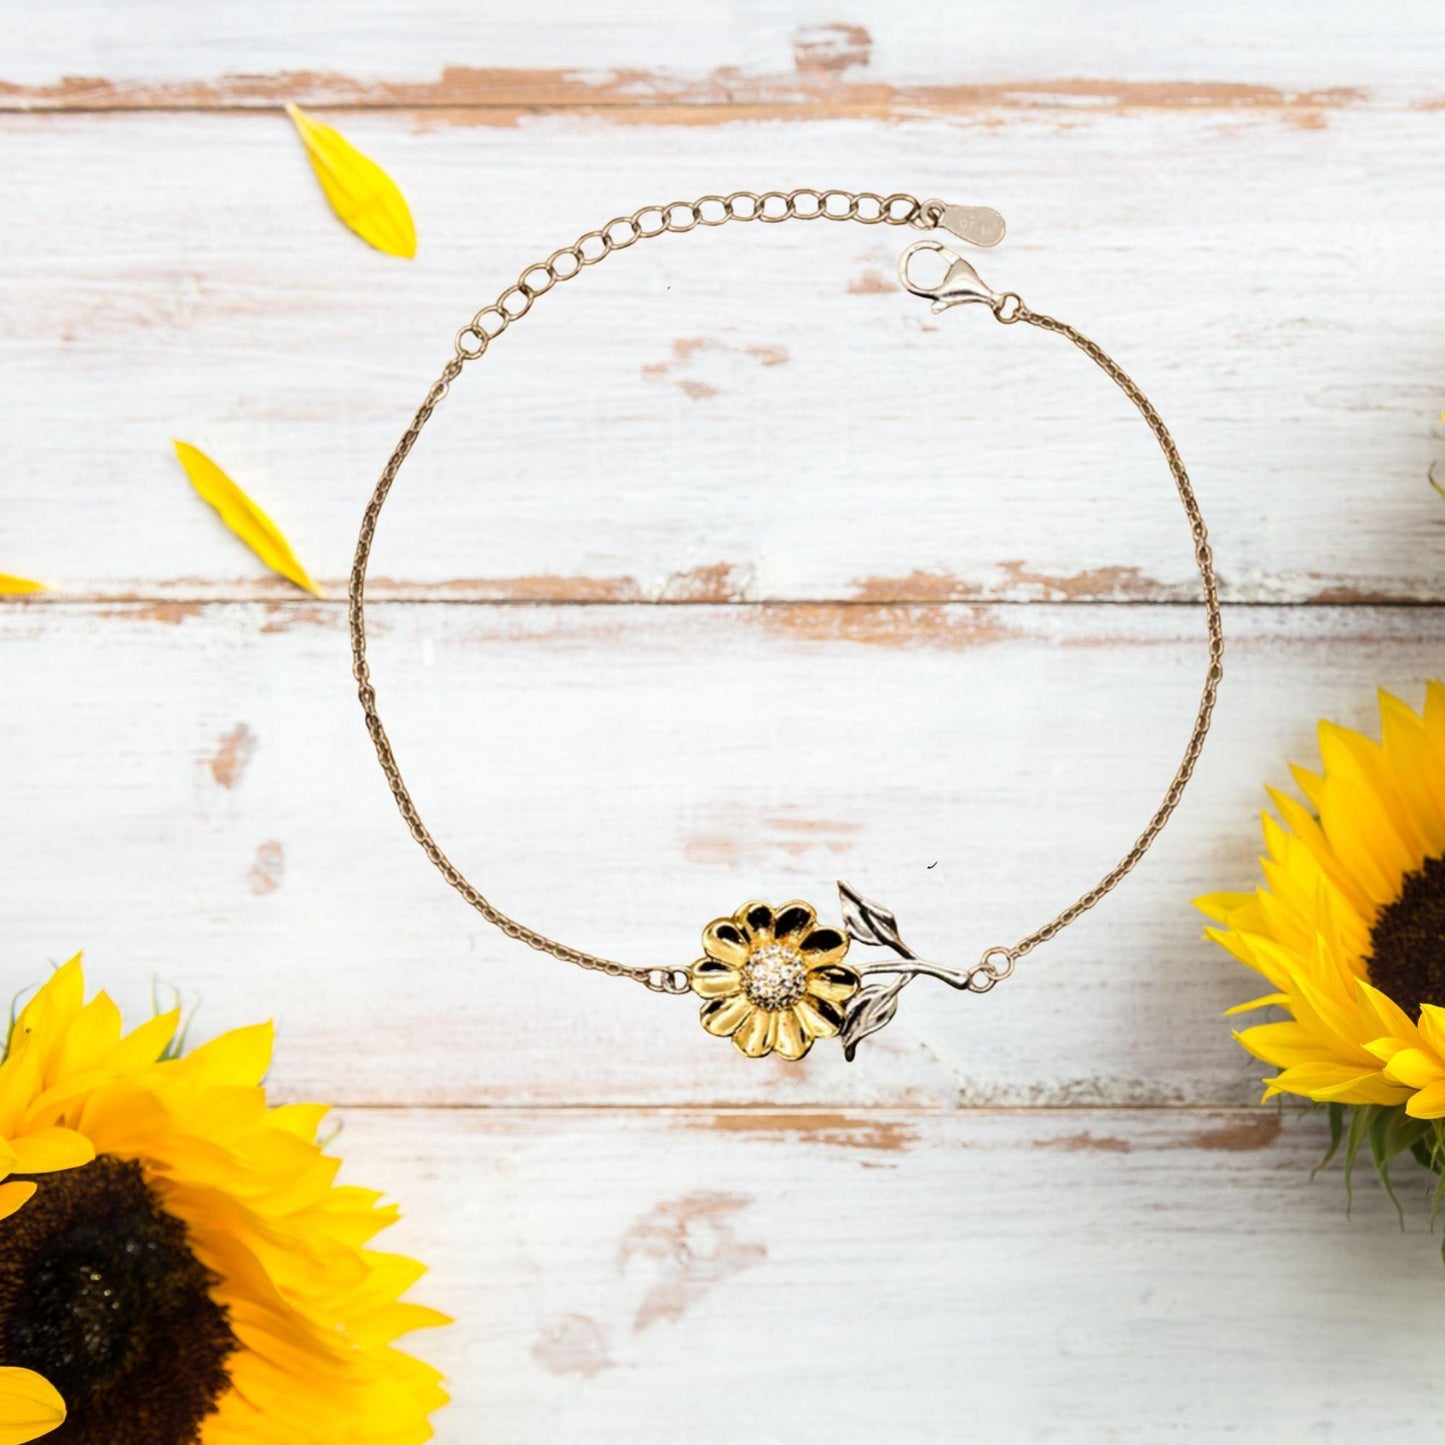 Remarkable Judge Gifts, Your dedication and hard work, Inspirational Birthday Christmas Unique Sunflower Bracelet For Judge, Coworkers, Men, Women, Friends - Mallard Moon Gift Shop